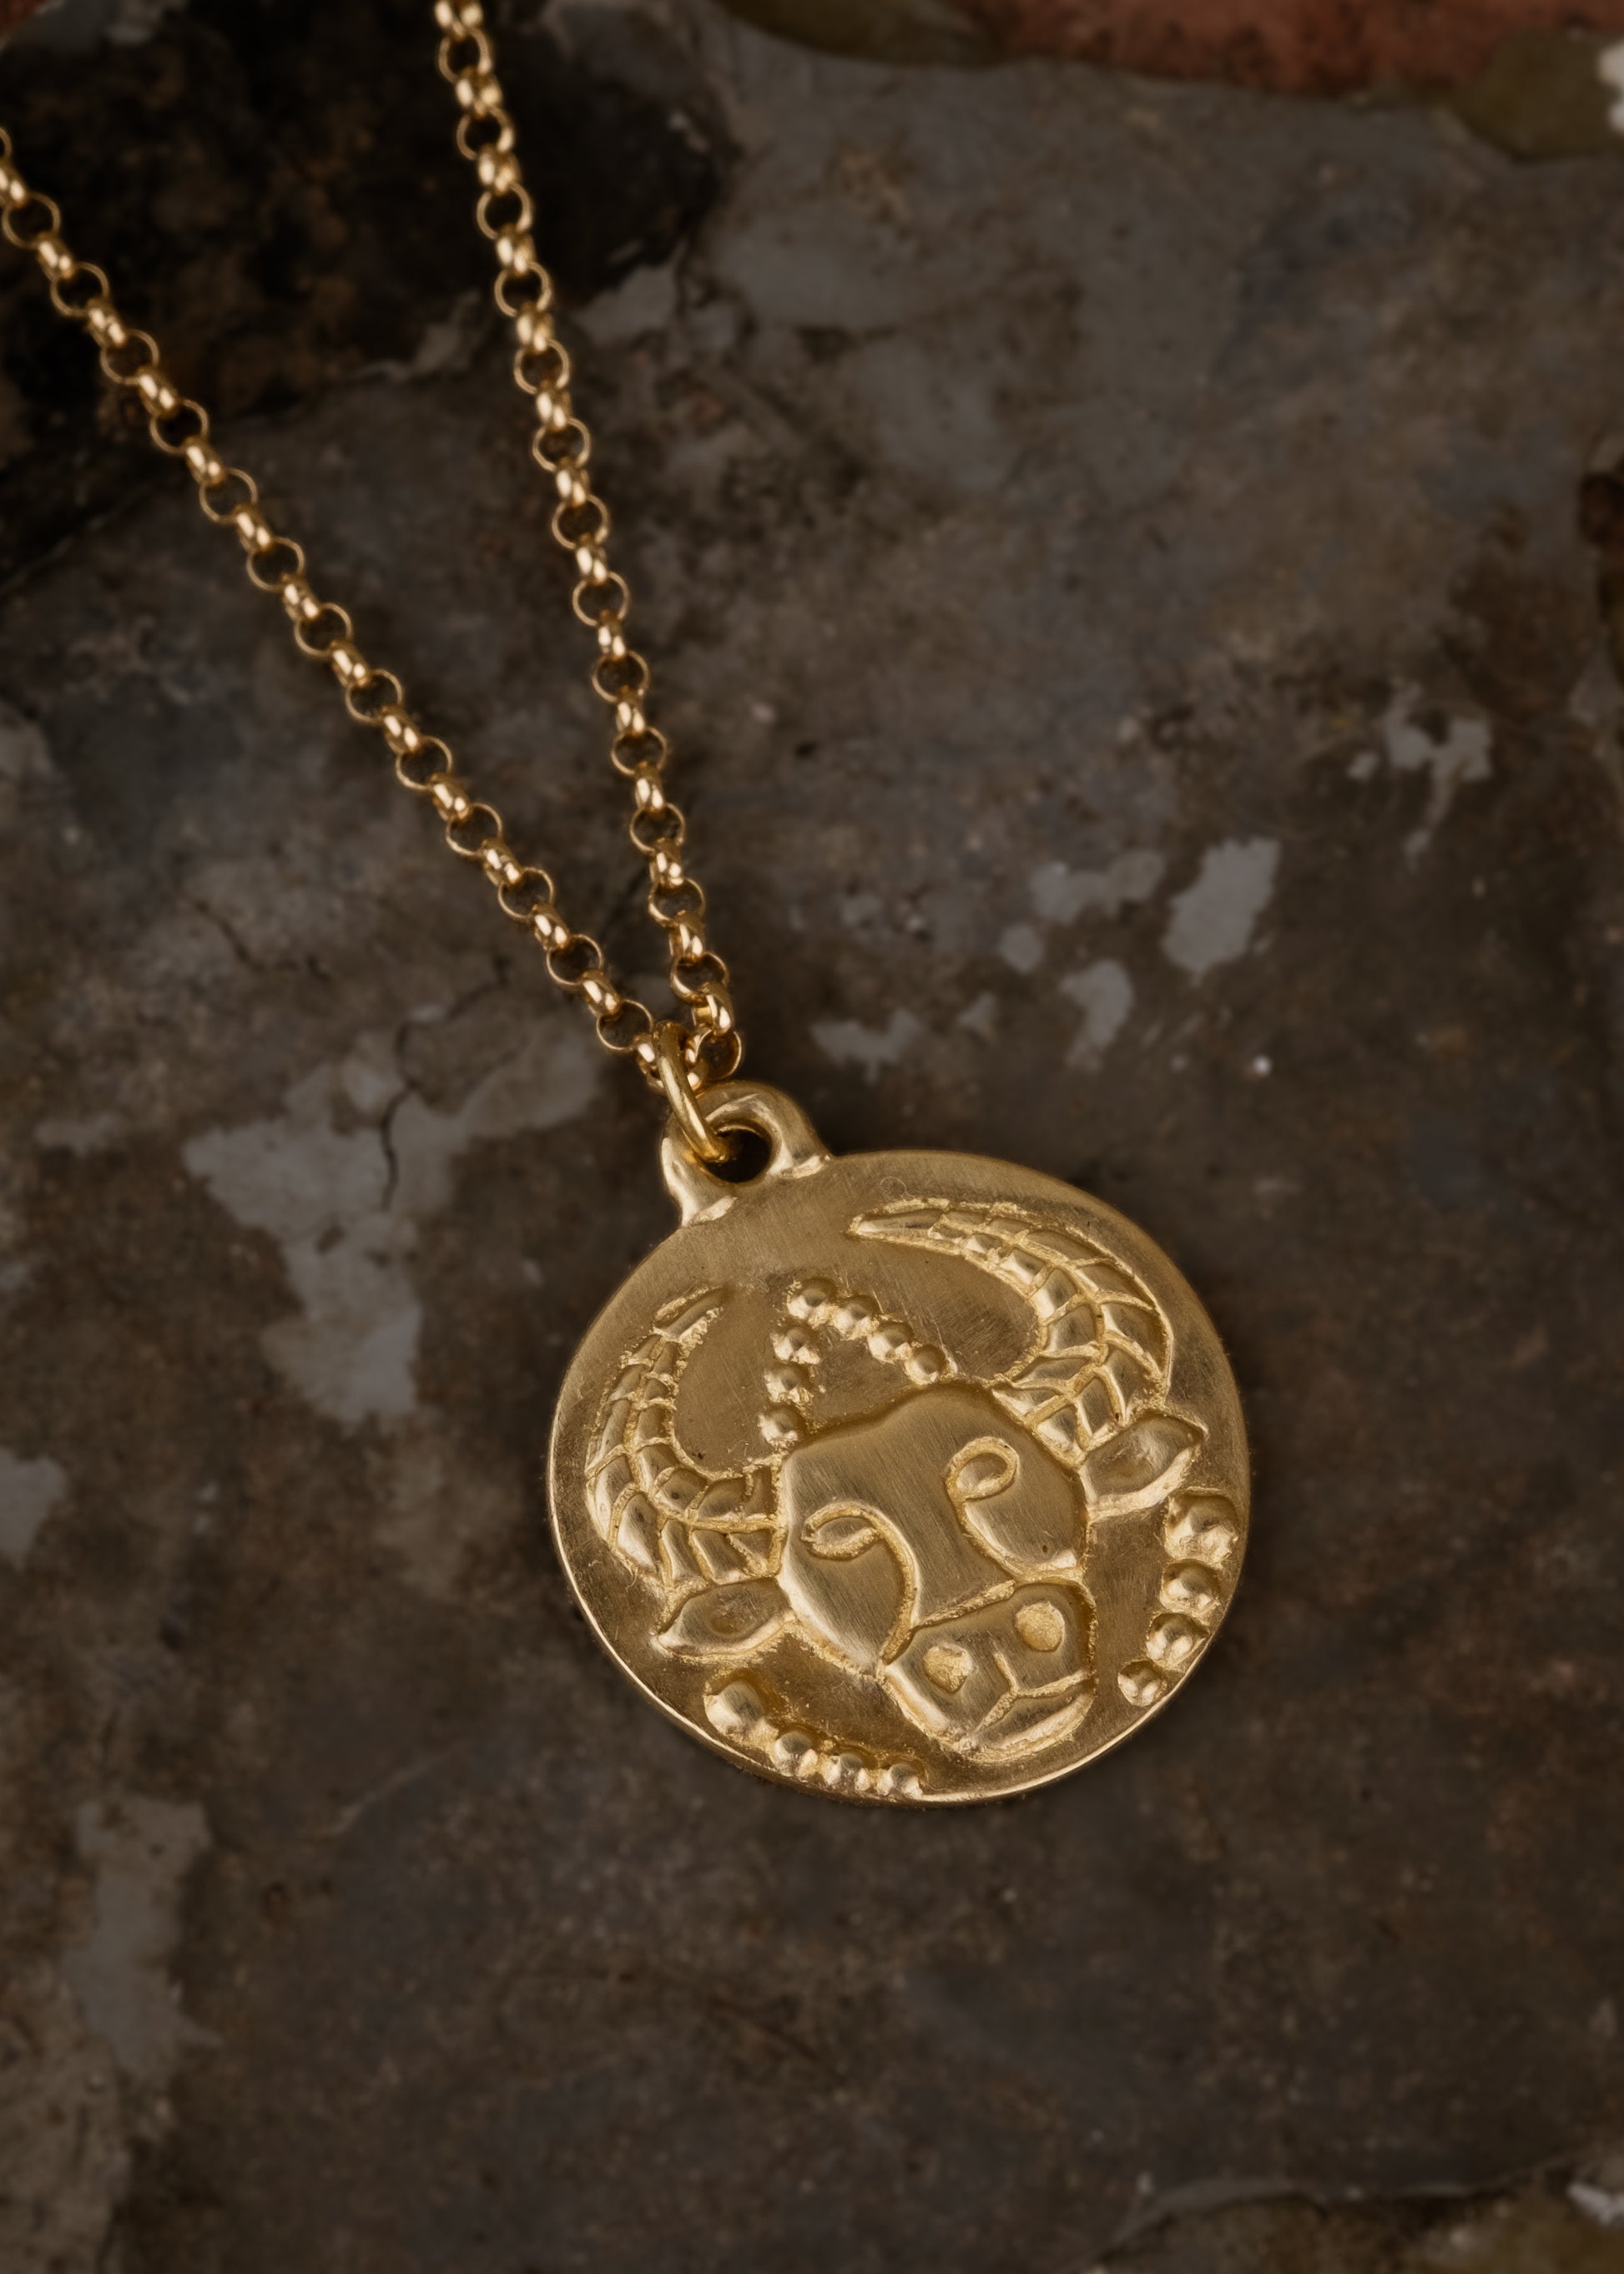 The second sign of the Zodiac, Earth sign Taurus seeks beauty and gives love fearlessly. A hand-carved bull, spiritual and wise, graces this pendant—creating a necklace that captures the power of the celestial sky. 